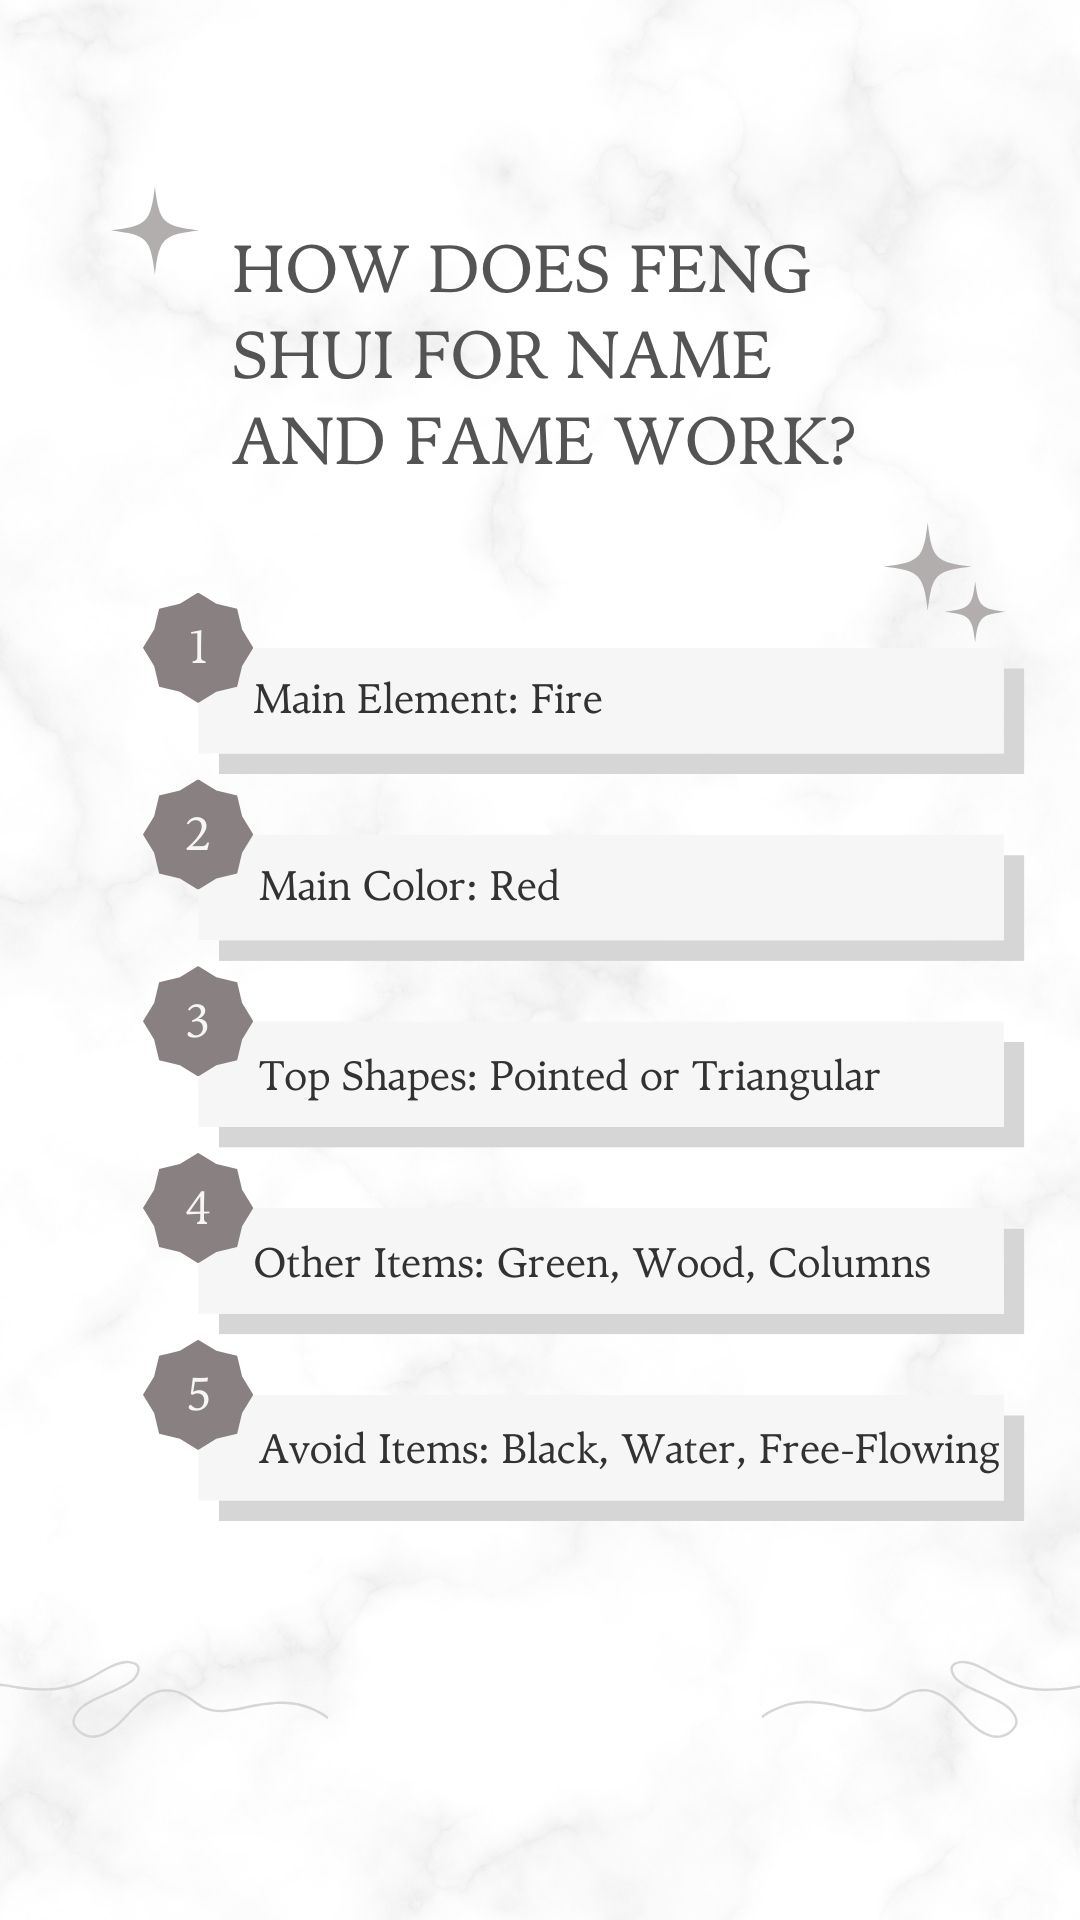 How Does Feng Shui For Name And Fame Work